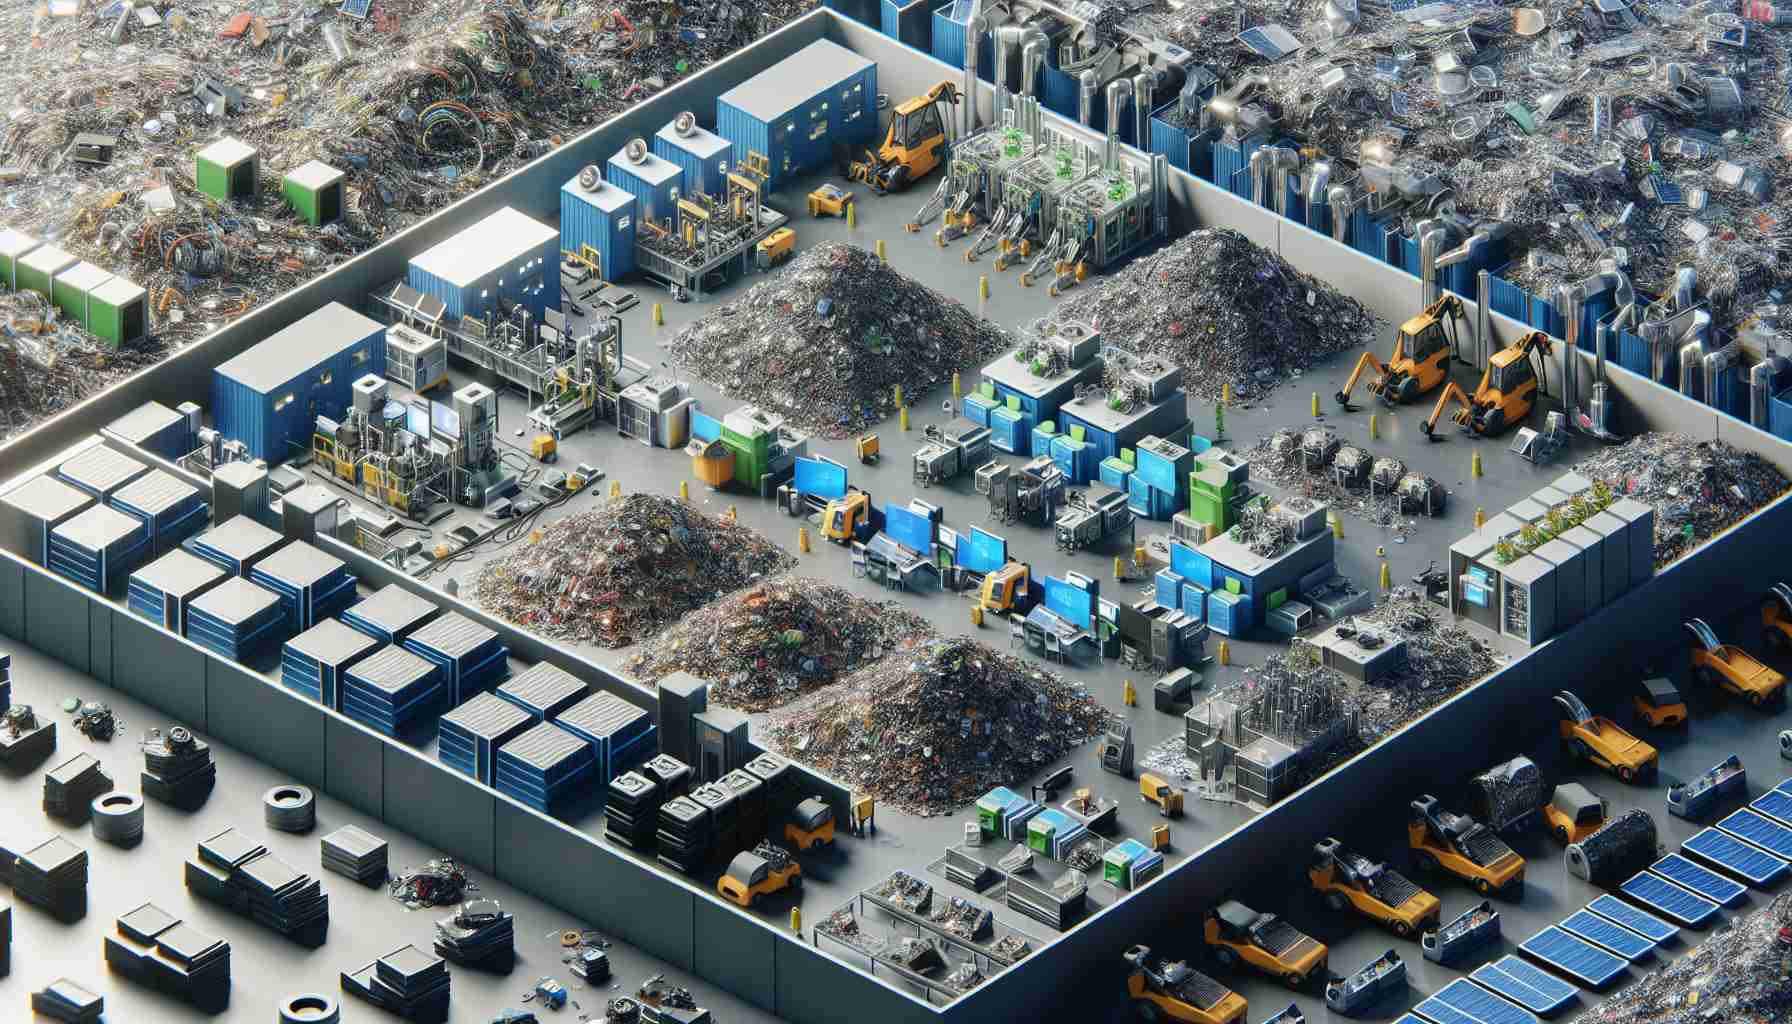 Innovative Solutions Transforming E-Waste into Sustainable Resources